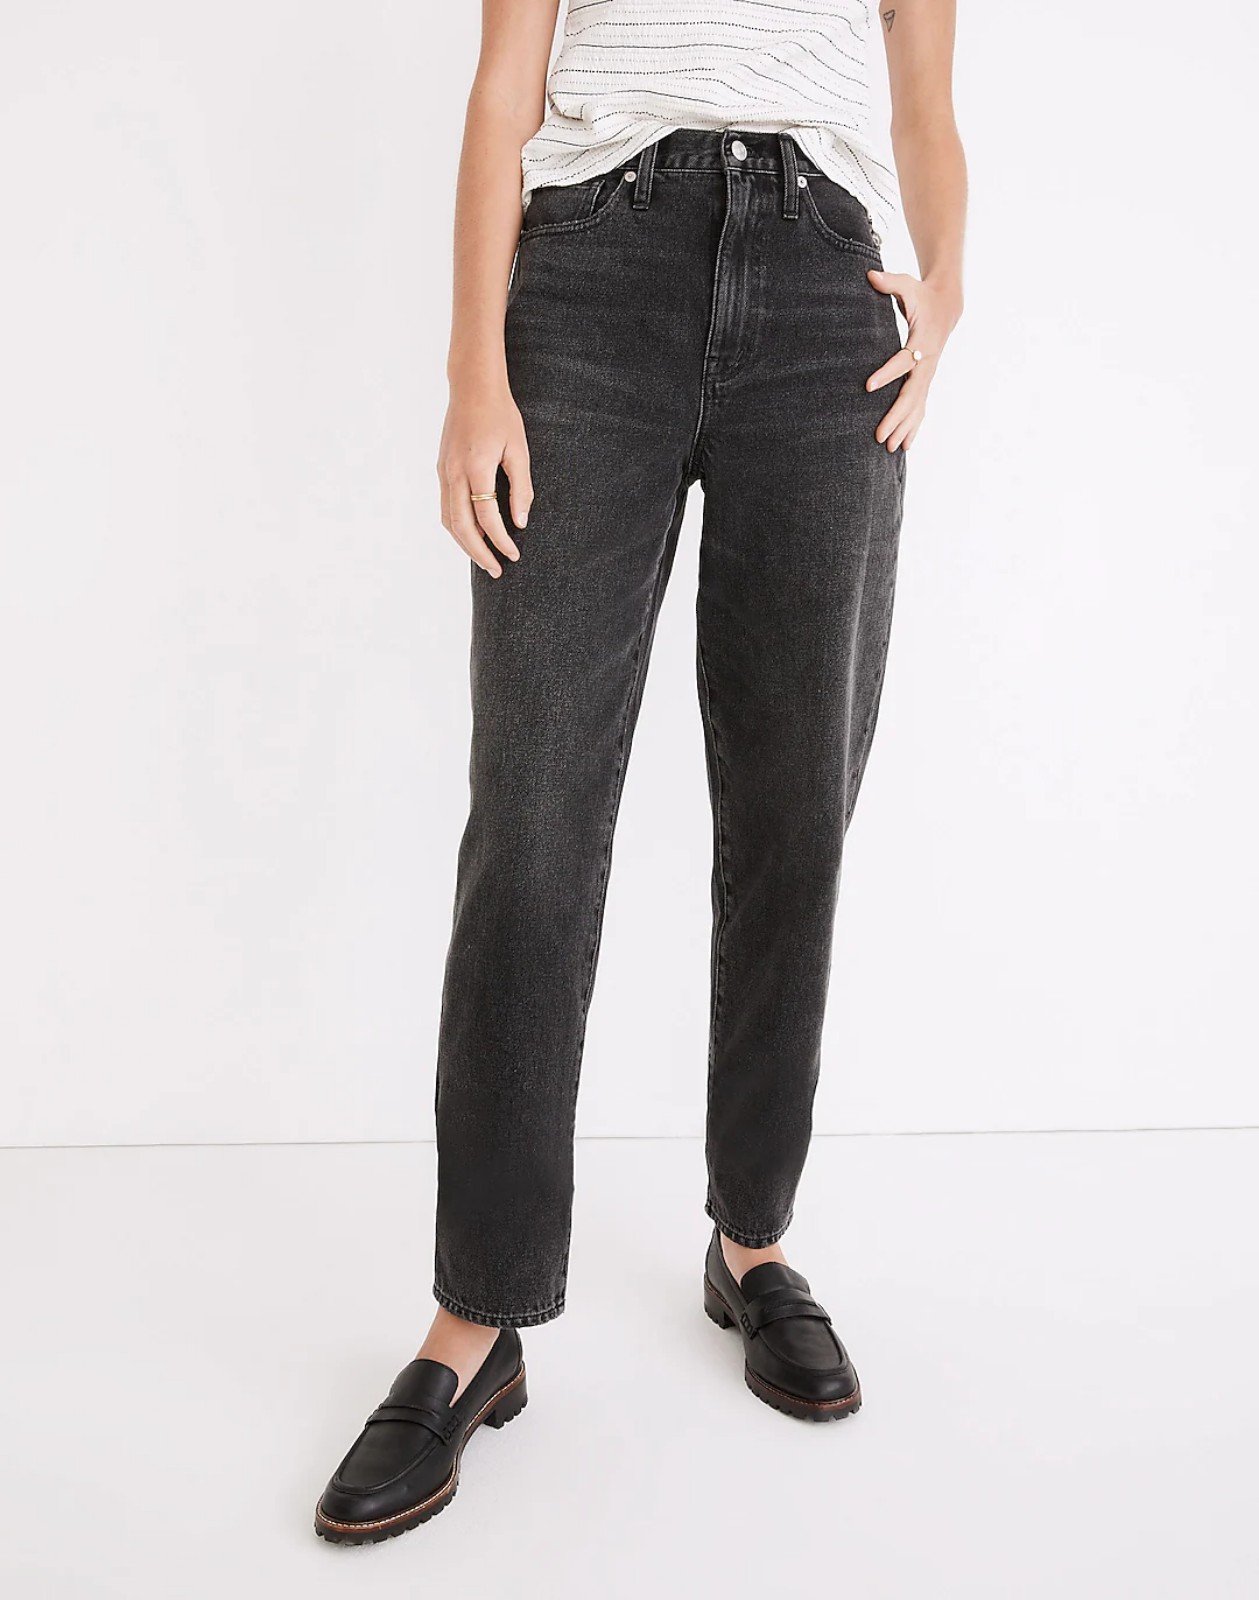 High quality Madewell Baggy Tapered Jeans in Mackinnon 